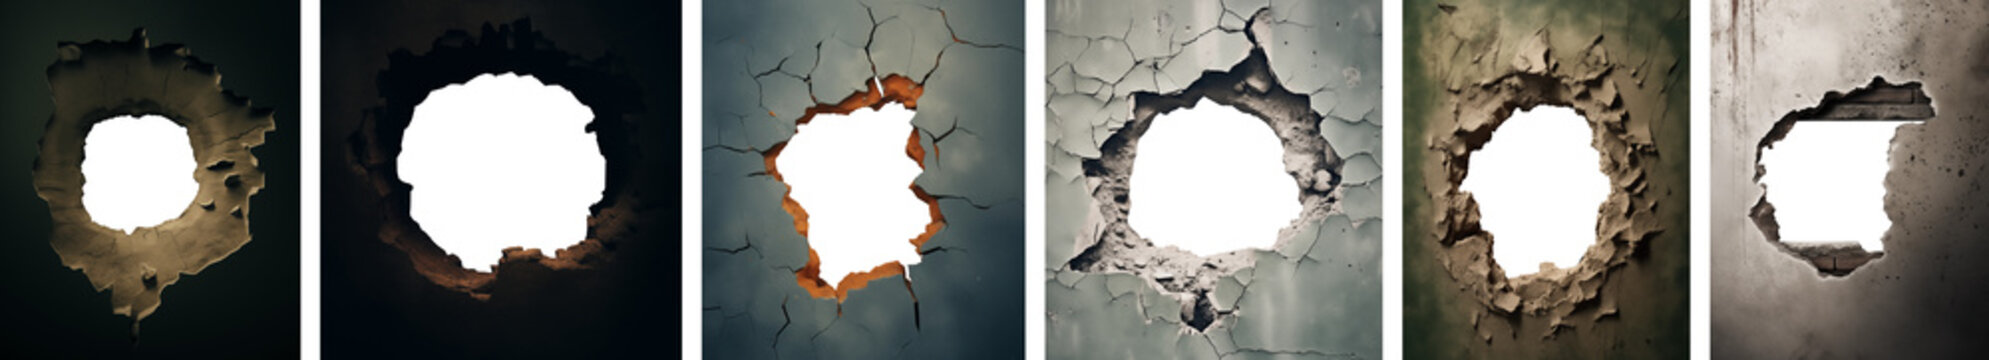 Hole in the wall - texture - various concrete wall surfaces, hole shapes and textures - Unique Premium Pen Tool Cutout Set 1